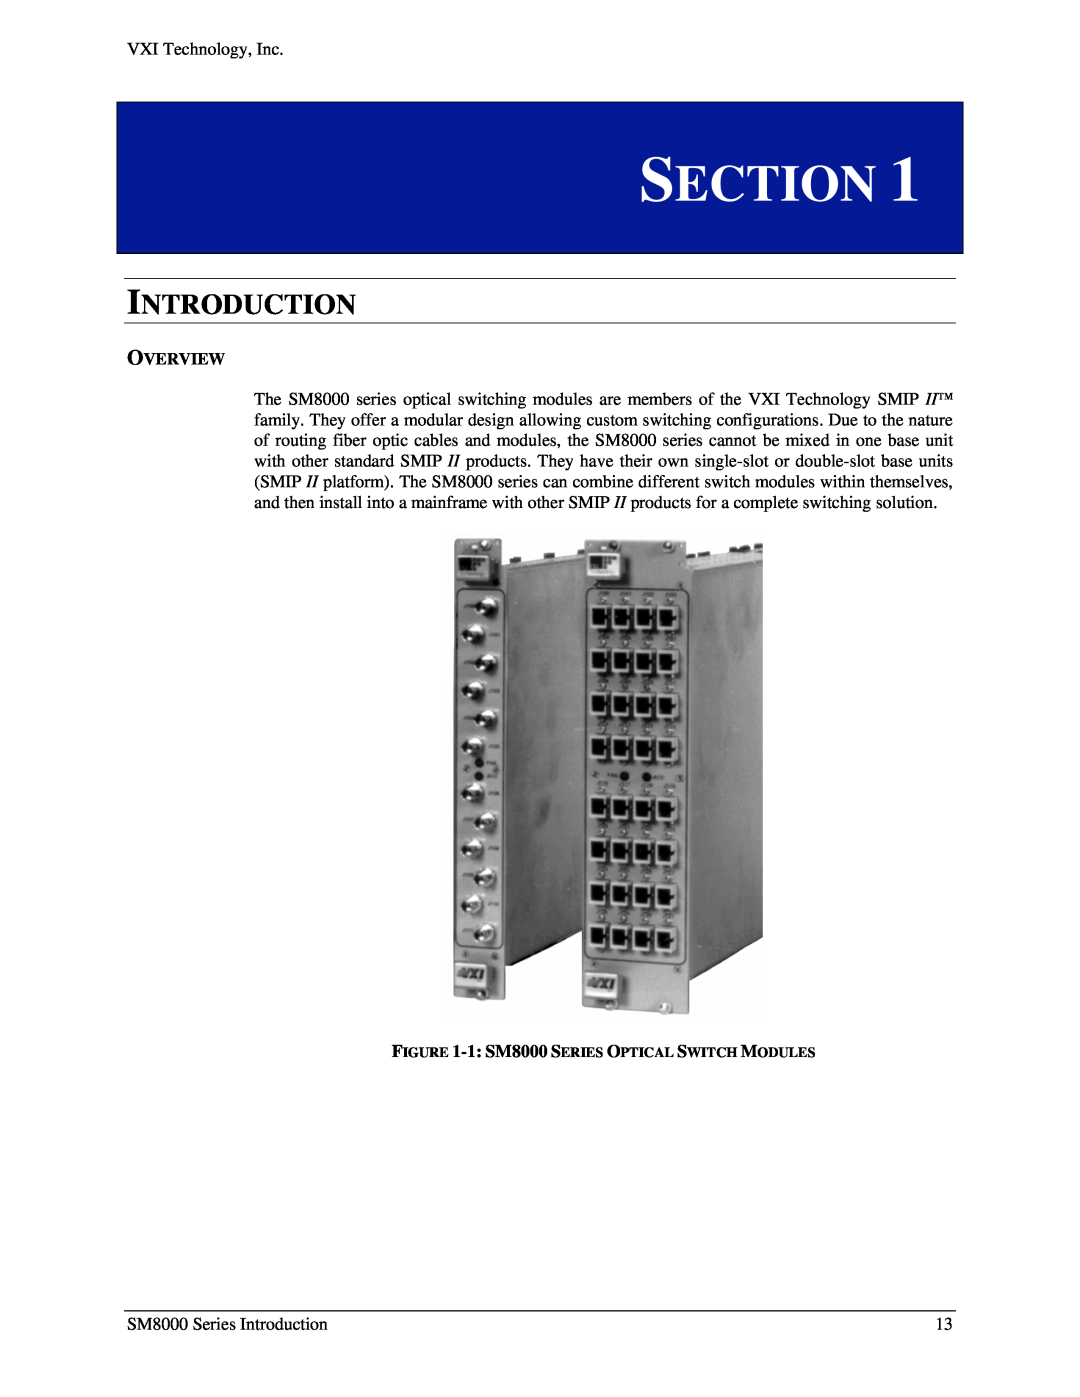 VXI SM8000 user manual Section, Introduction, Overview 